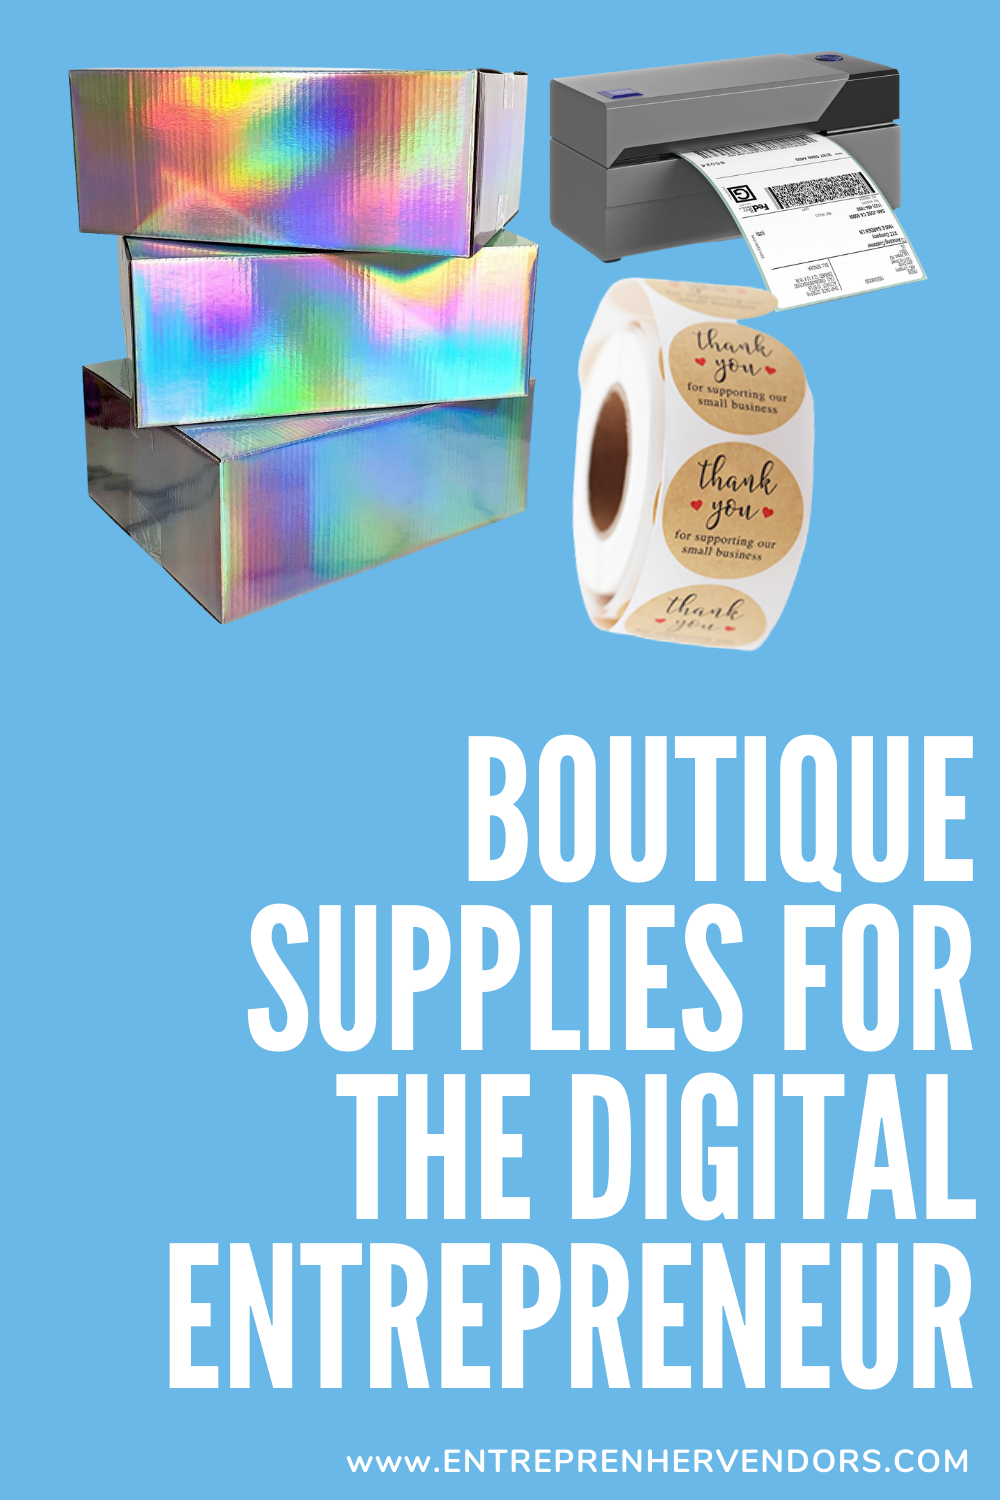 Where to Find Boutique Supplies